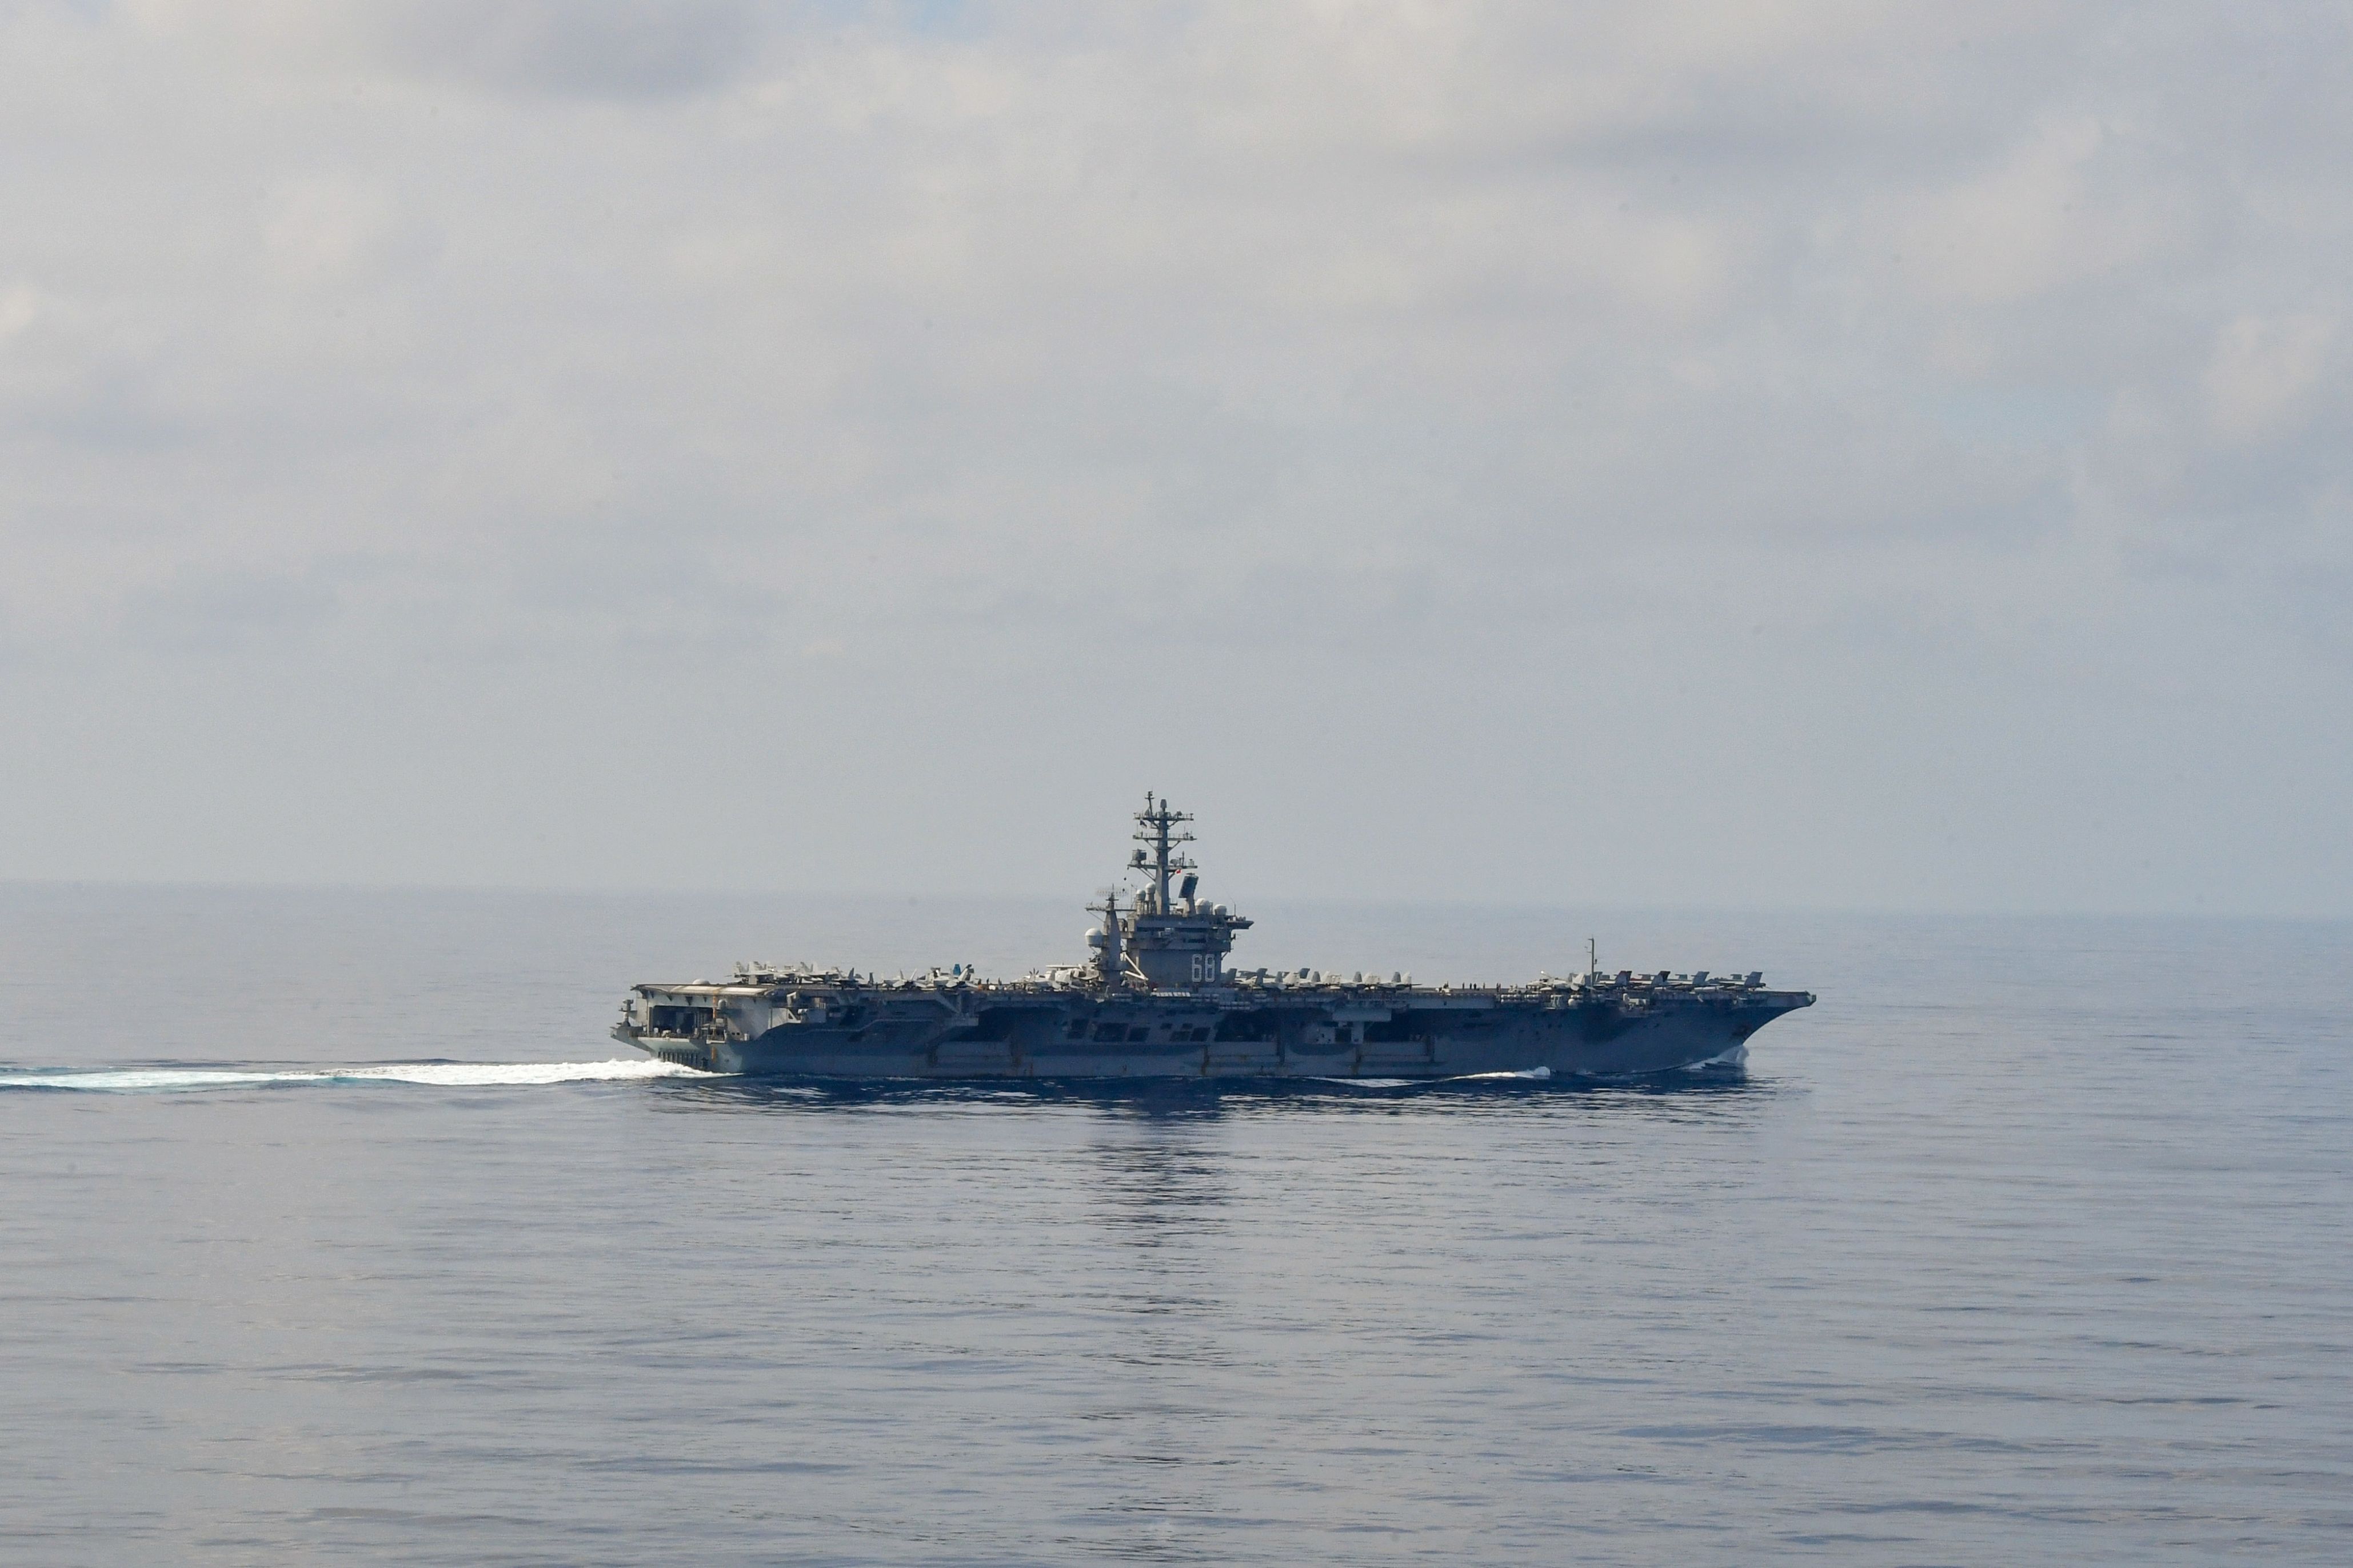 230115-N-BI507-1181 SOUTH CHINA SEA (Jan. 15, 2022) The aircraft carrier USS Nimitz (CVN 68) steams through the South China Sea. Nimitz in U.S. 7th Fleet conducting routine operations. 7th Fleet is the U.S. Navy's largest forward-deployed numbered fleet, and routinely interacts and operates with Allies and partners in preserving a free and open Indo-Pacific region. (U.S. Navy photo by Mass Communication Specialist 3rd Class Carson Croom)